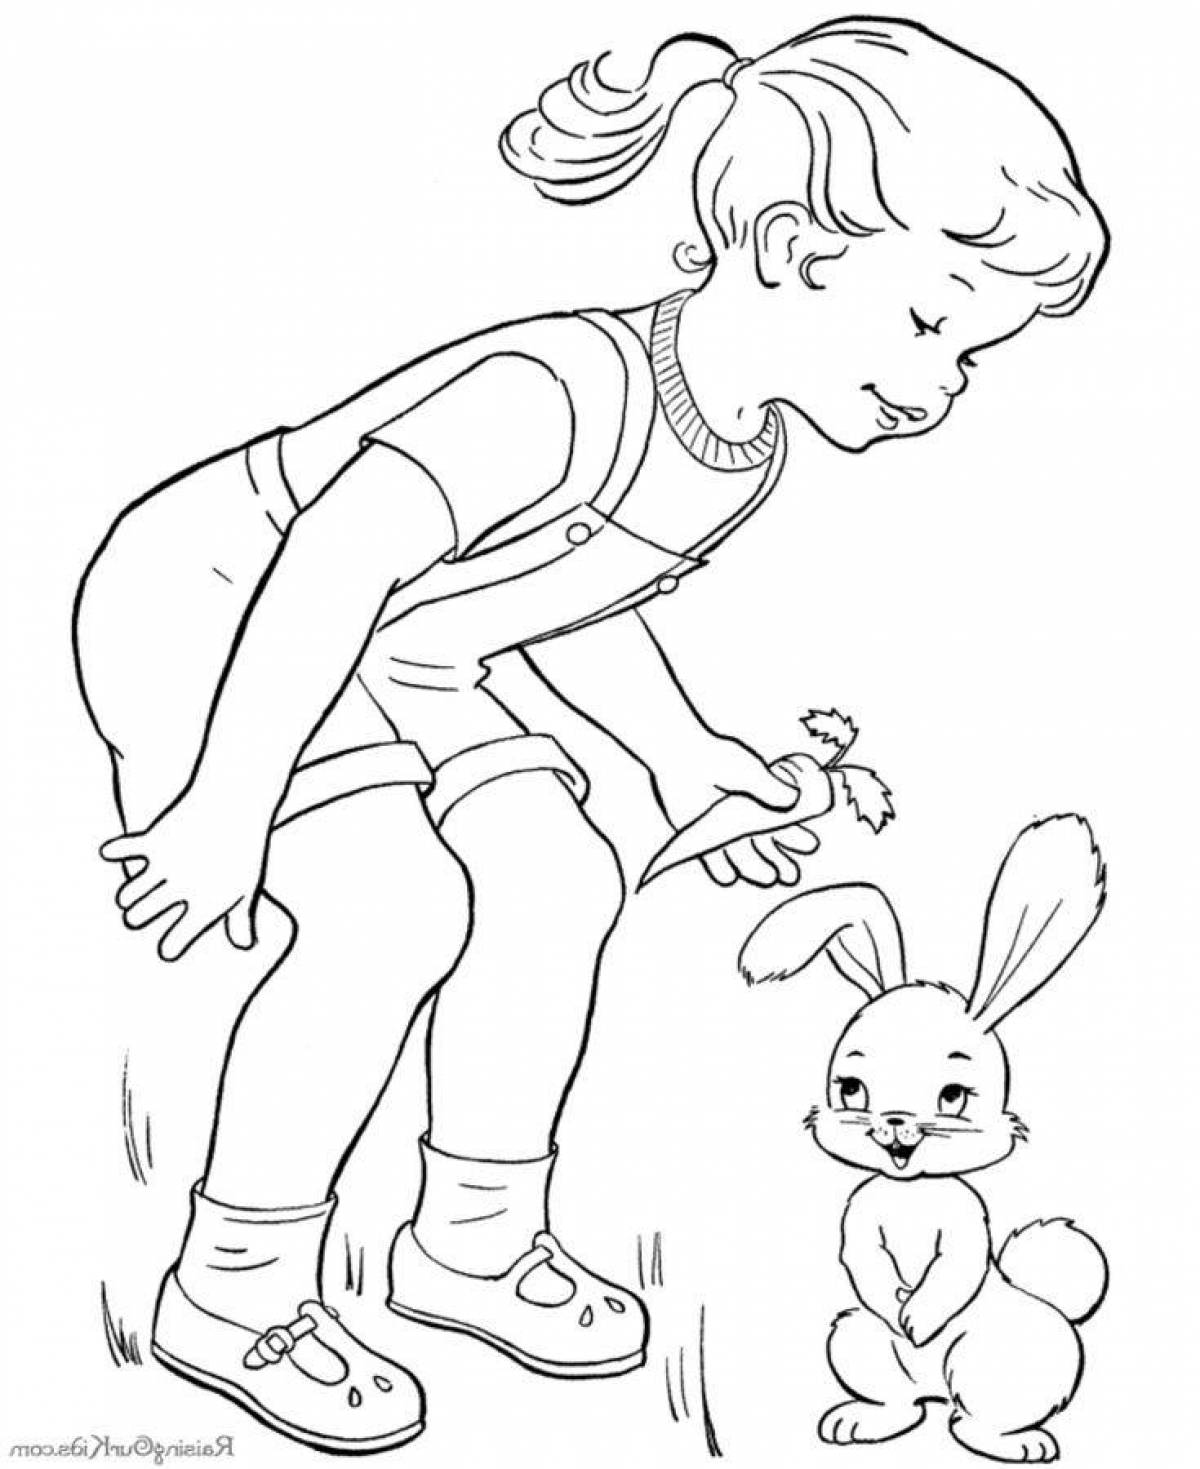 Animated coloring page slap